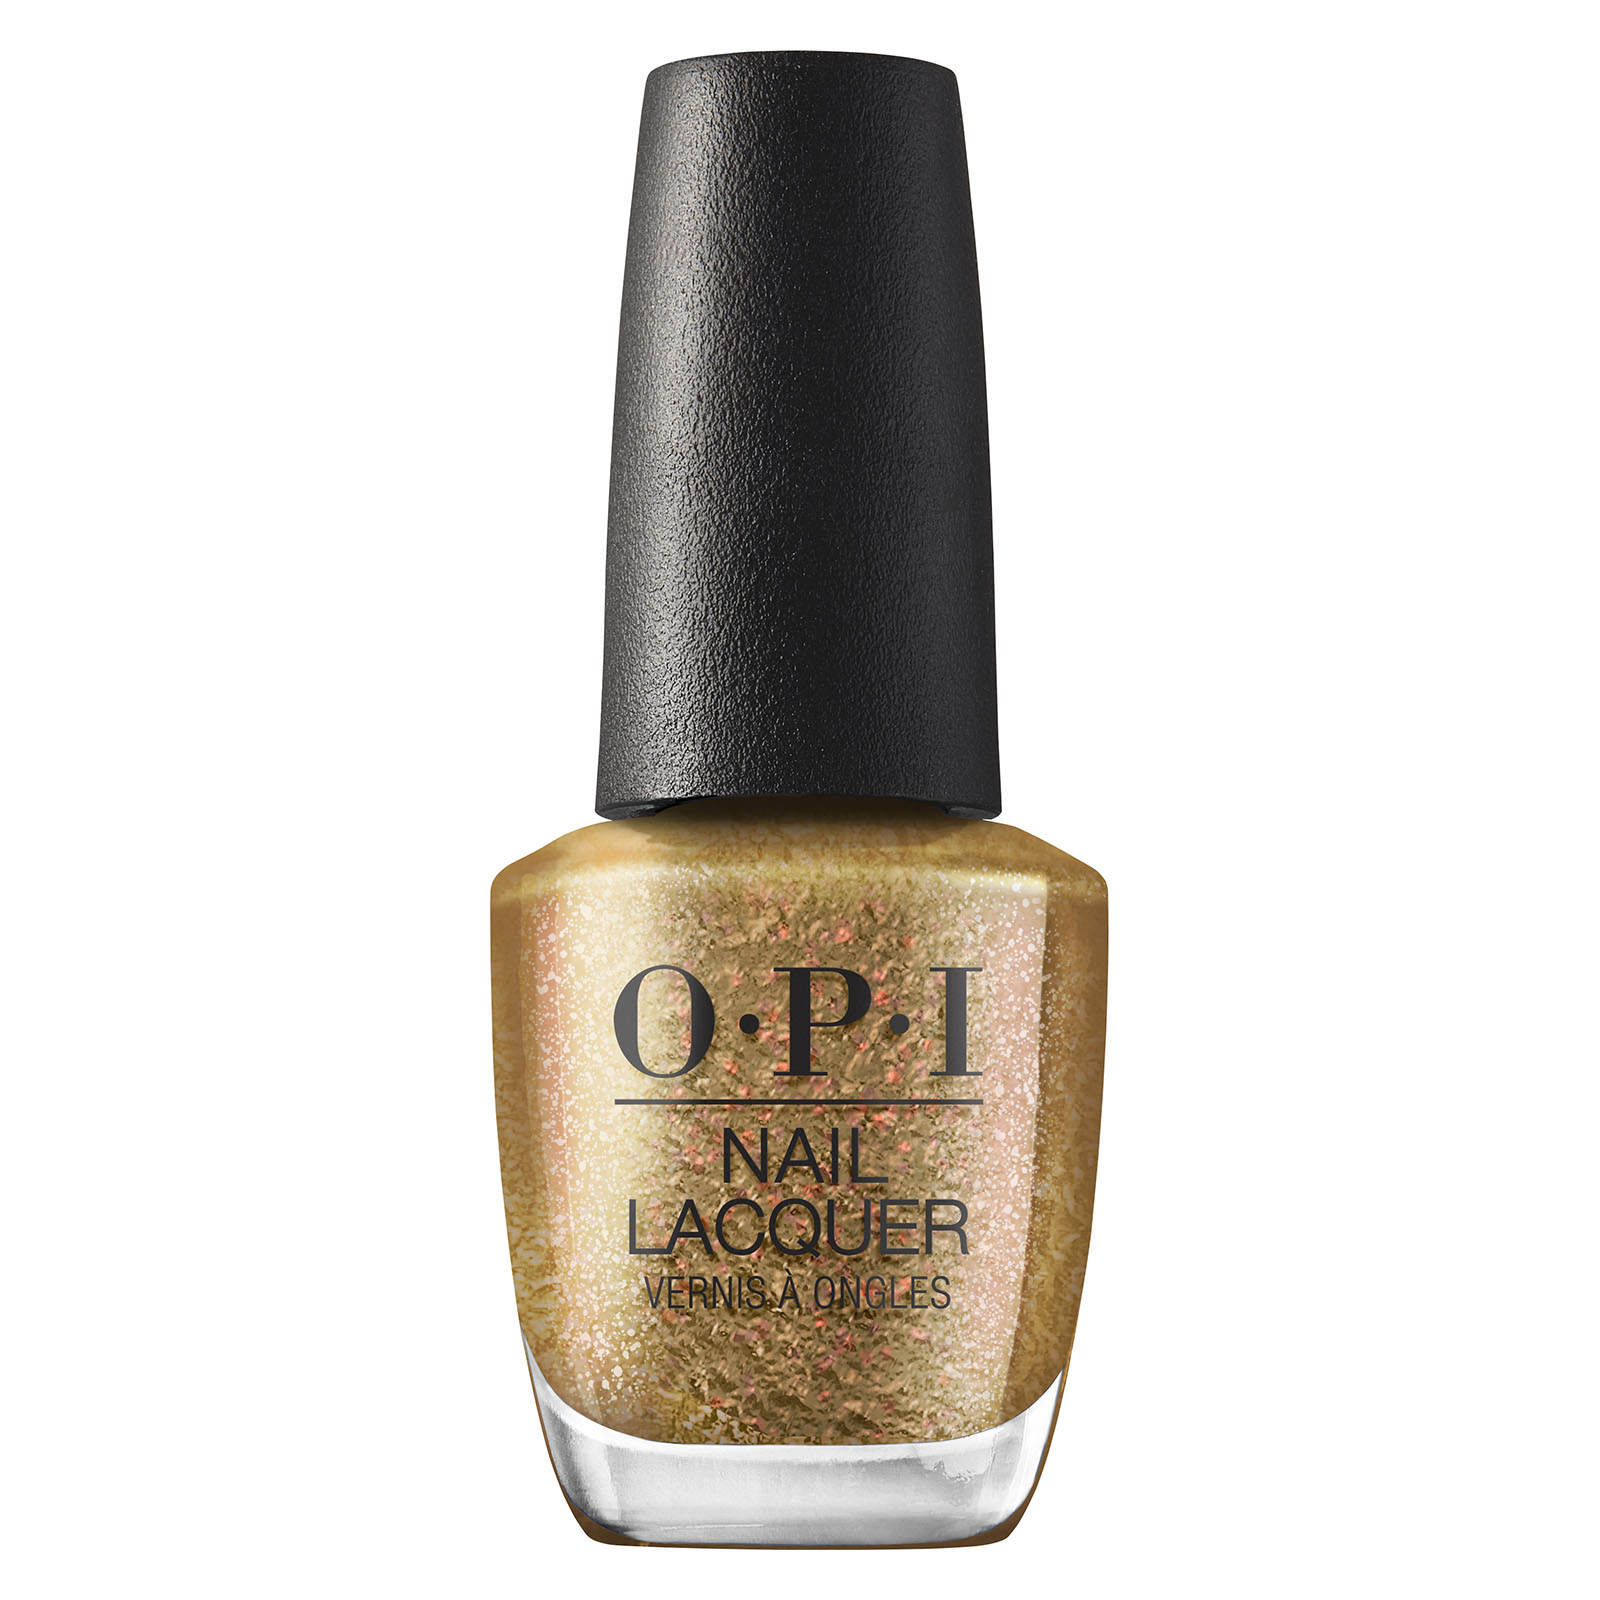 Opi Nail Polish Lacquer NORDIC COLLECTION 15ml Choice of 12 Colours -   Canada